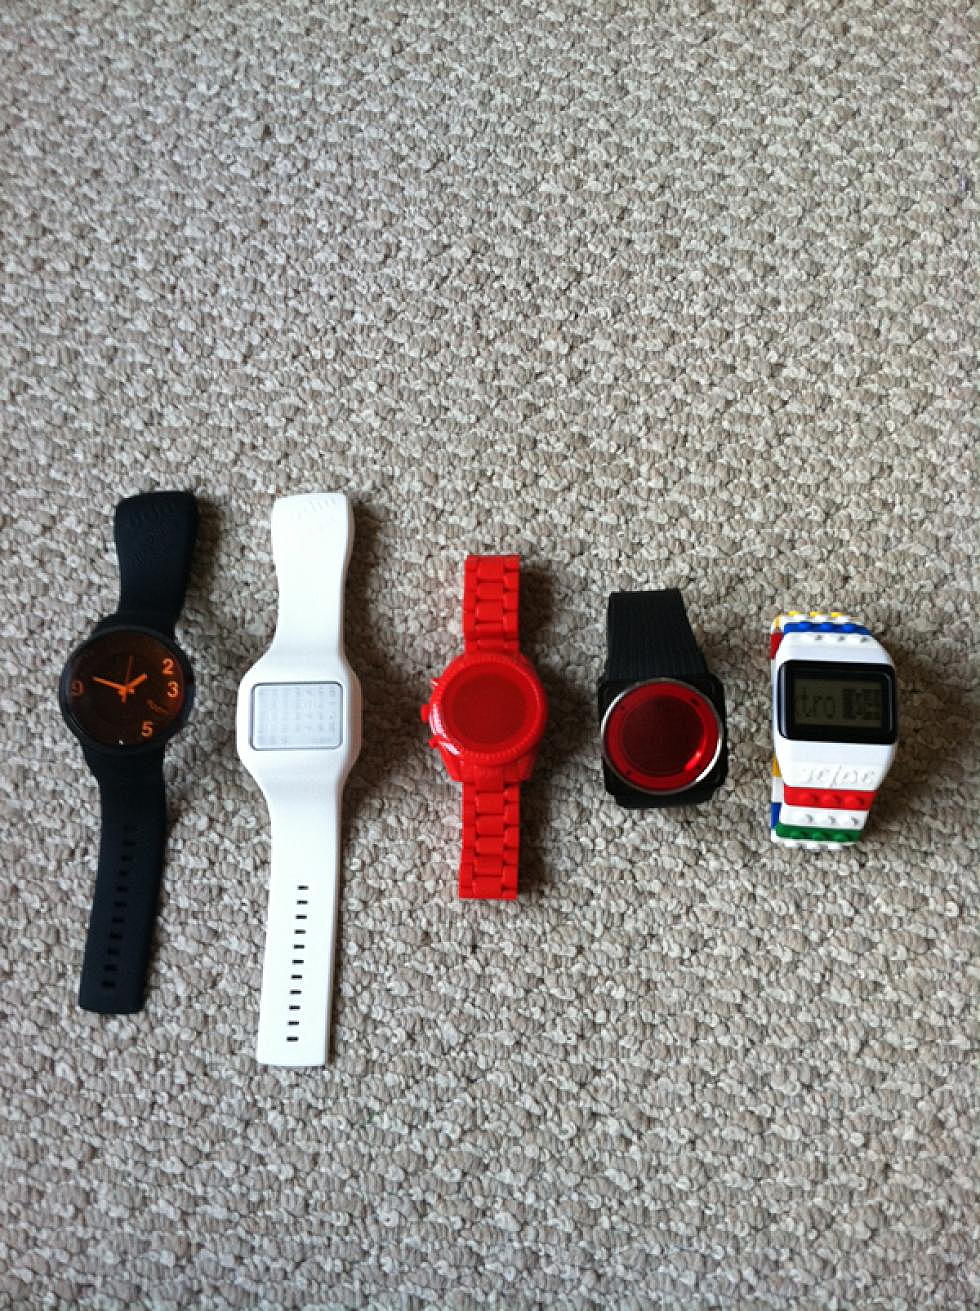 My Week with odm Watches